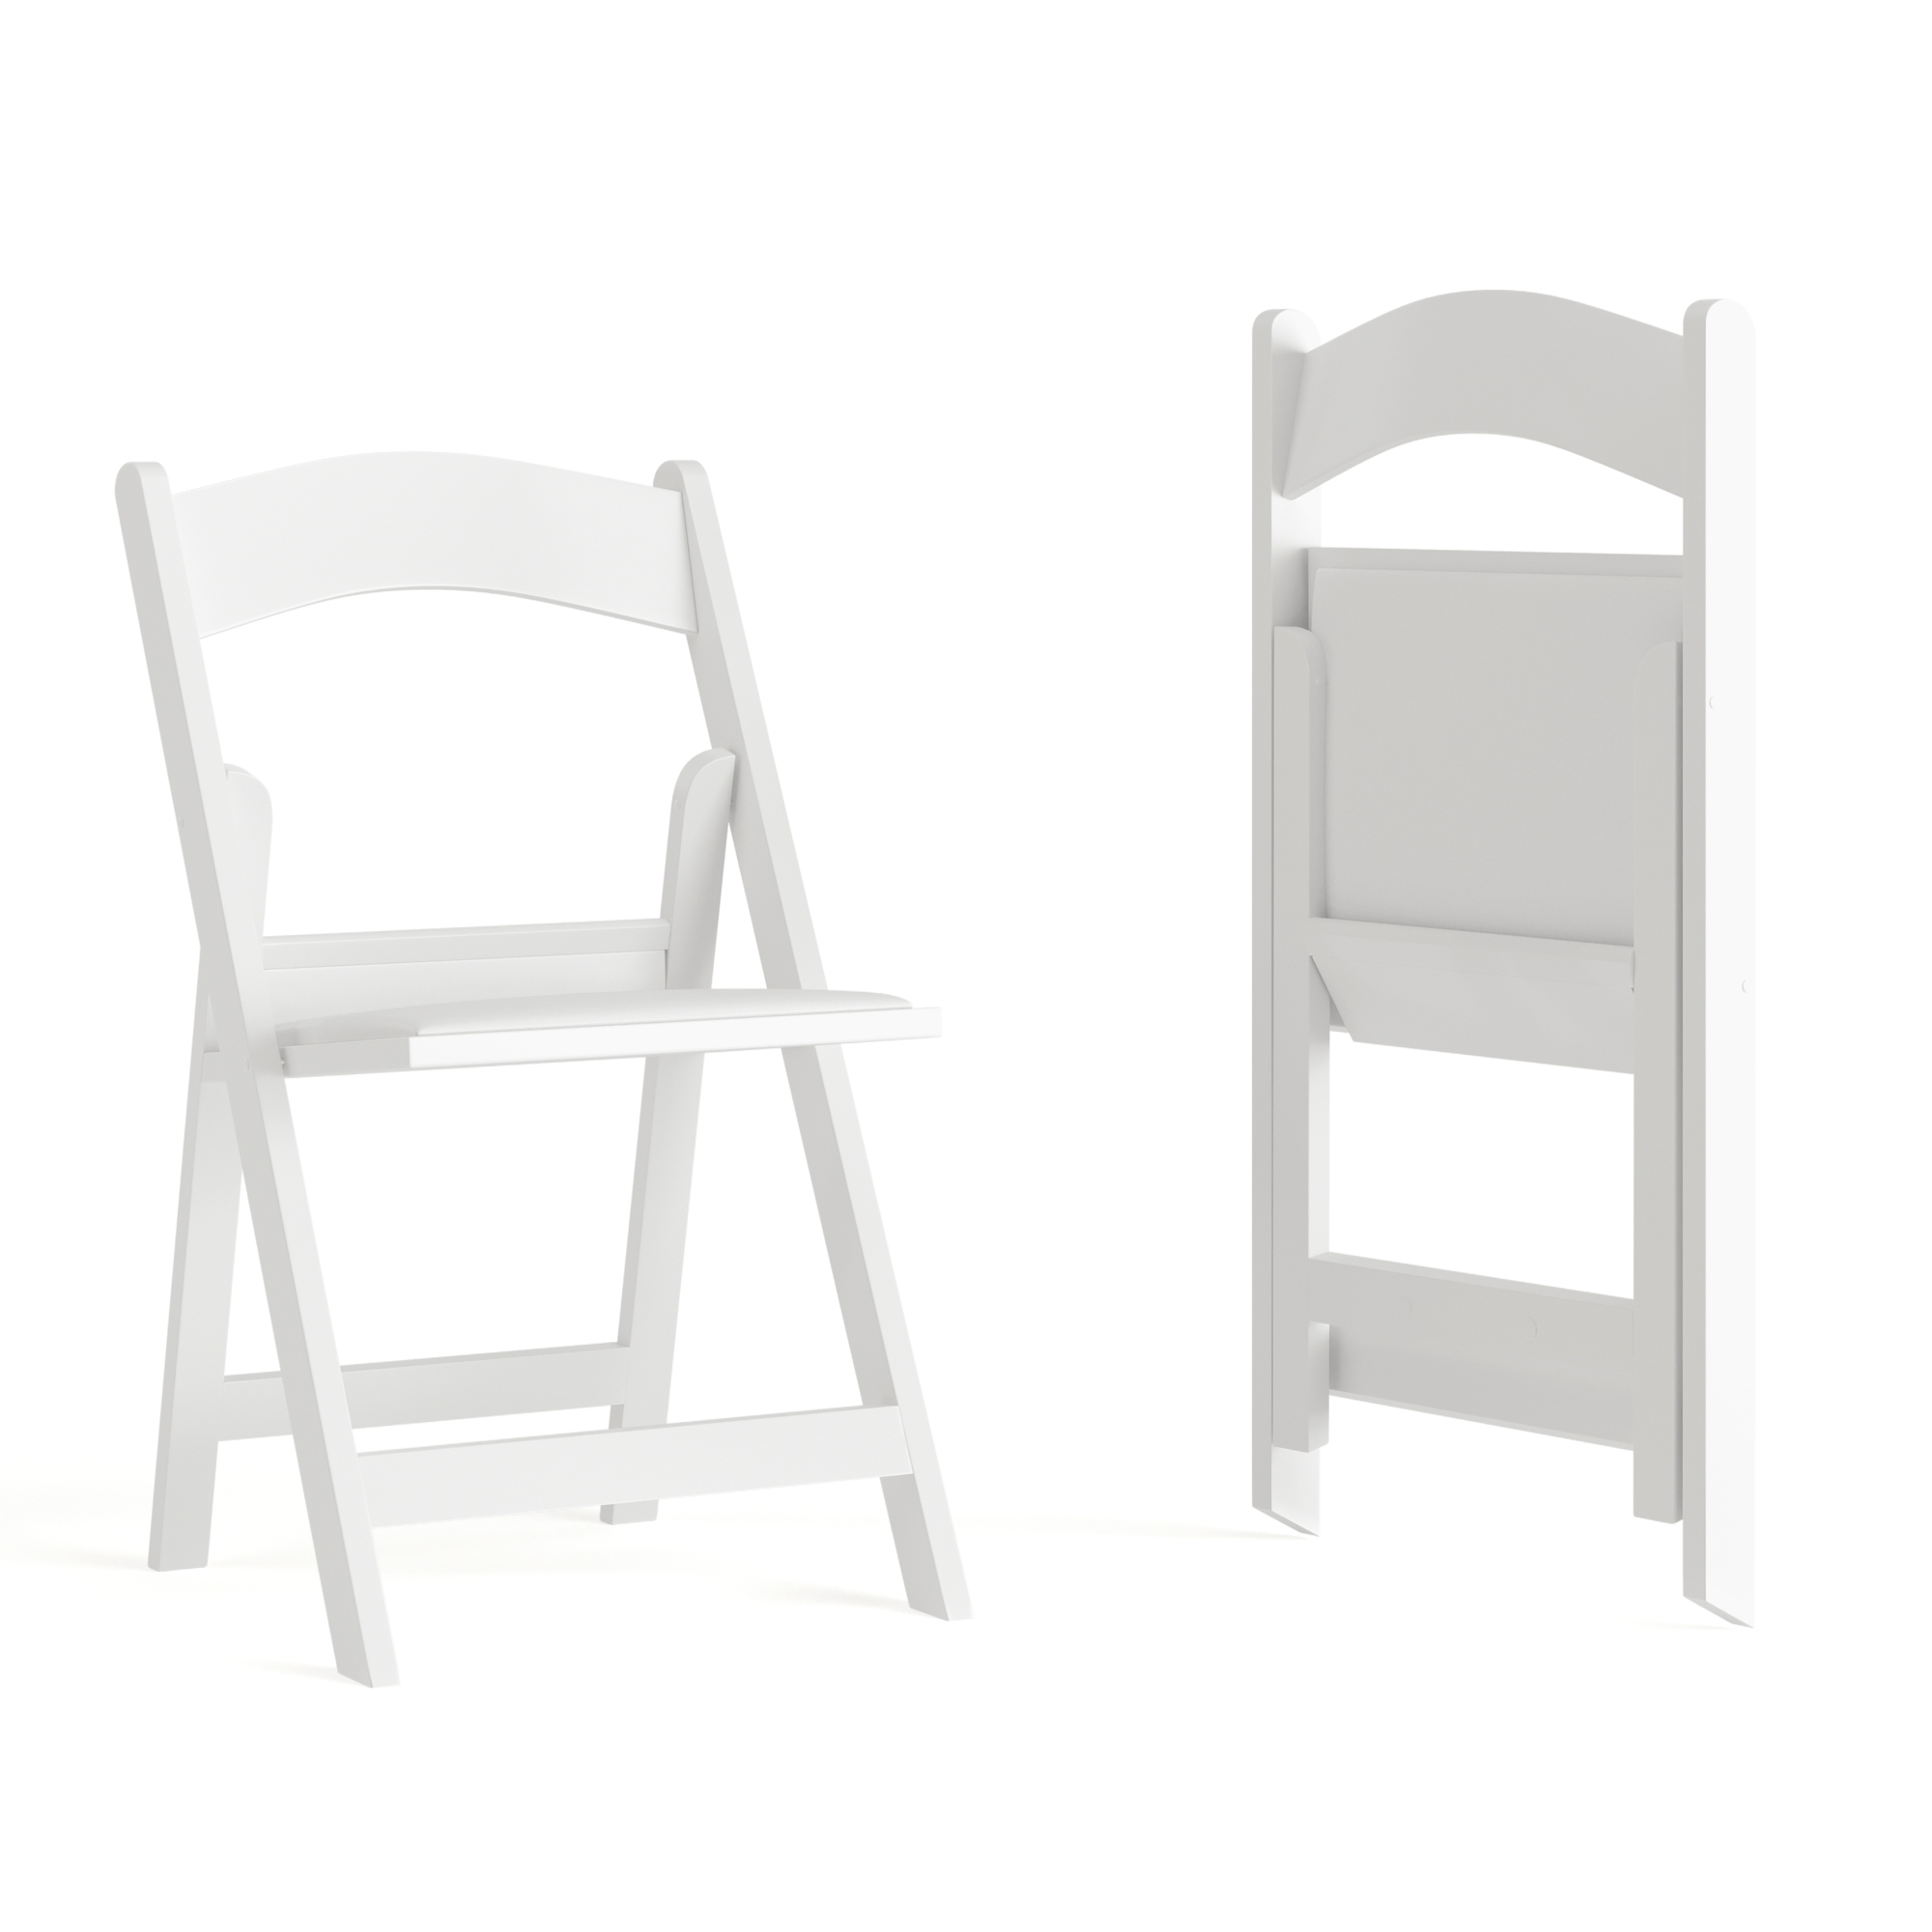 Flash Furniture, Folding Chair-White Resin-2 Pack- Event Chair, Primary Color White, Included (qty.) 2, Model 2LEL1WHITE